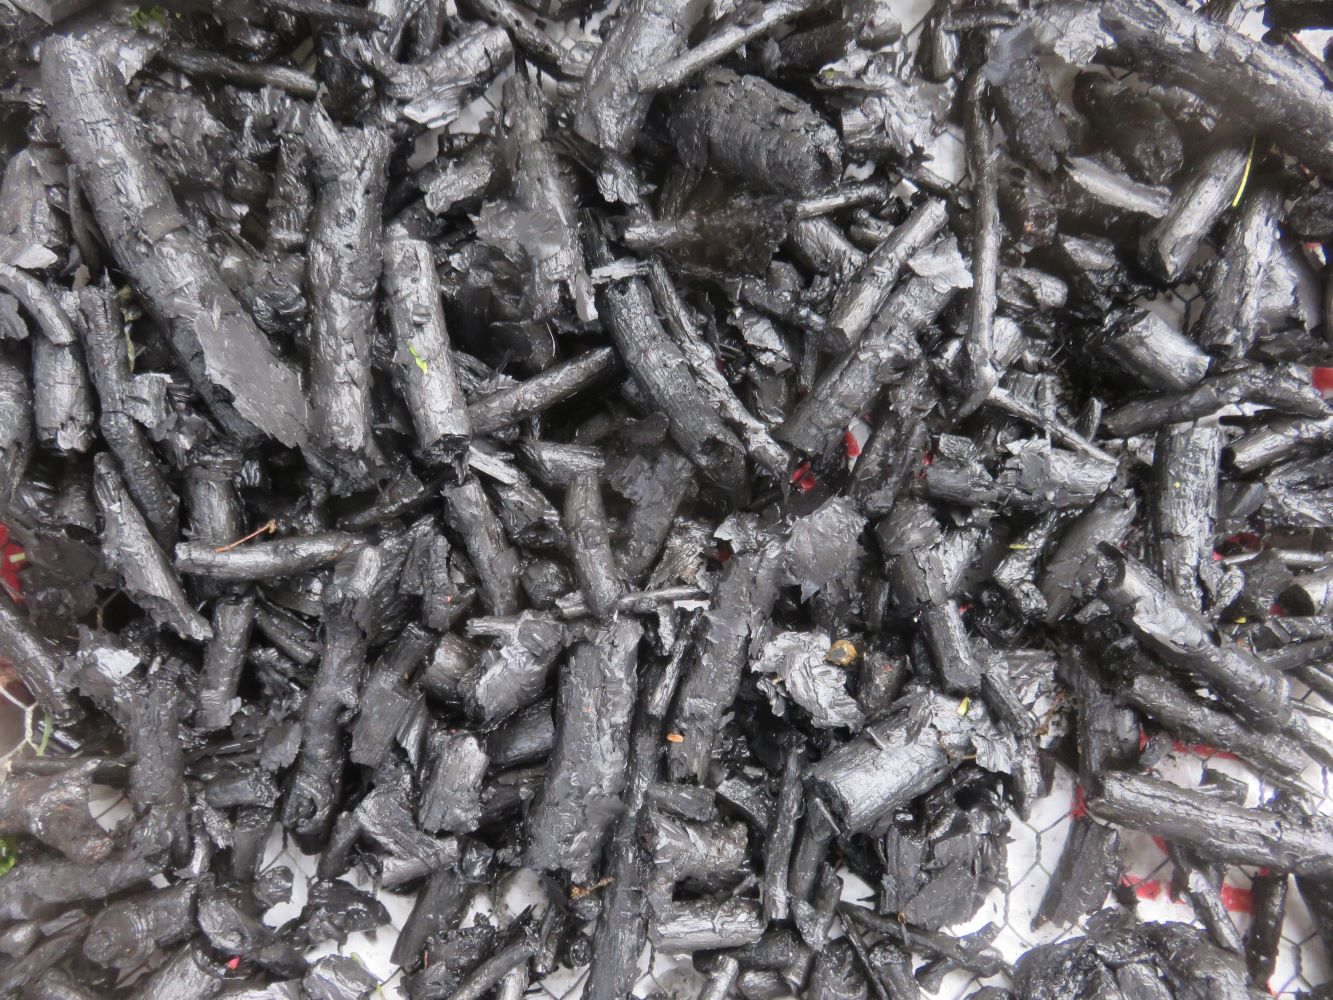 The carbon shells left over from burning anaerobically. Biochar, a fabulous soil additive for sandy infertile soils.